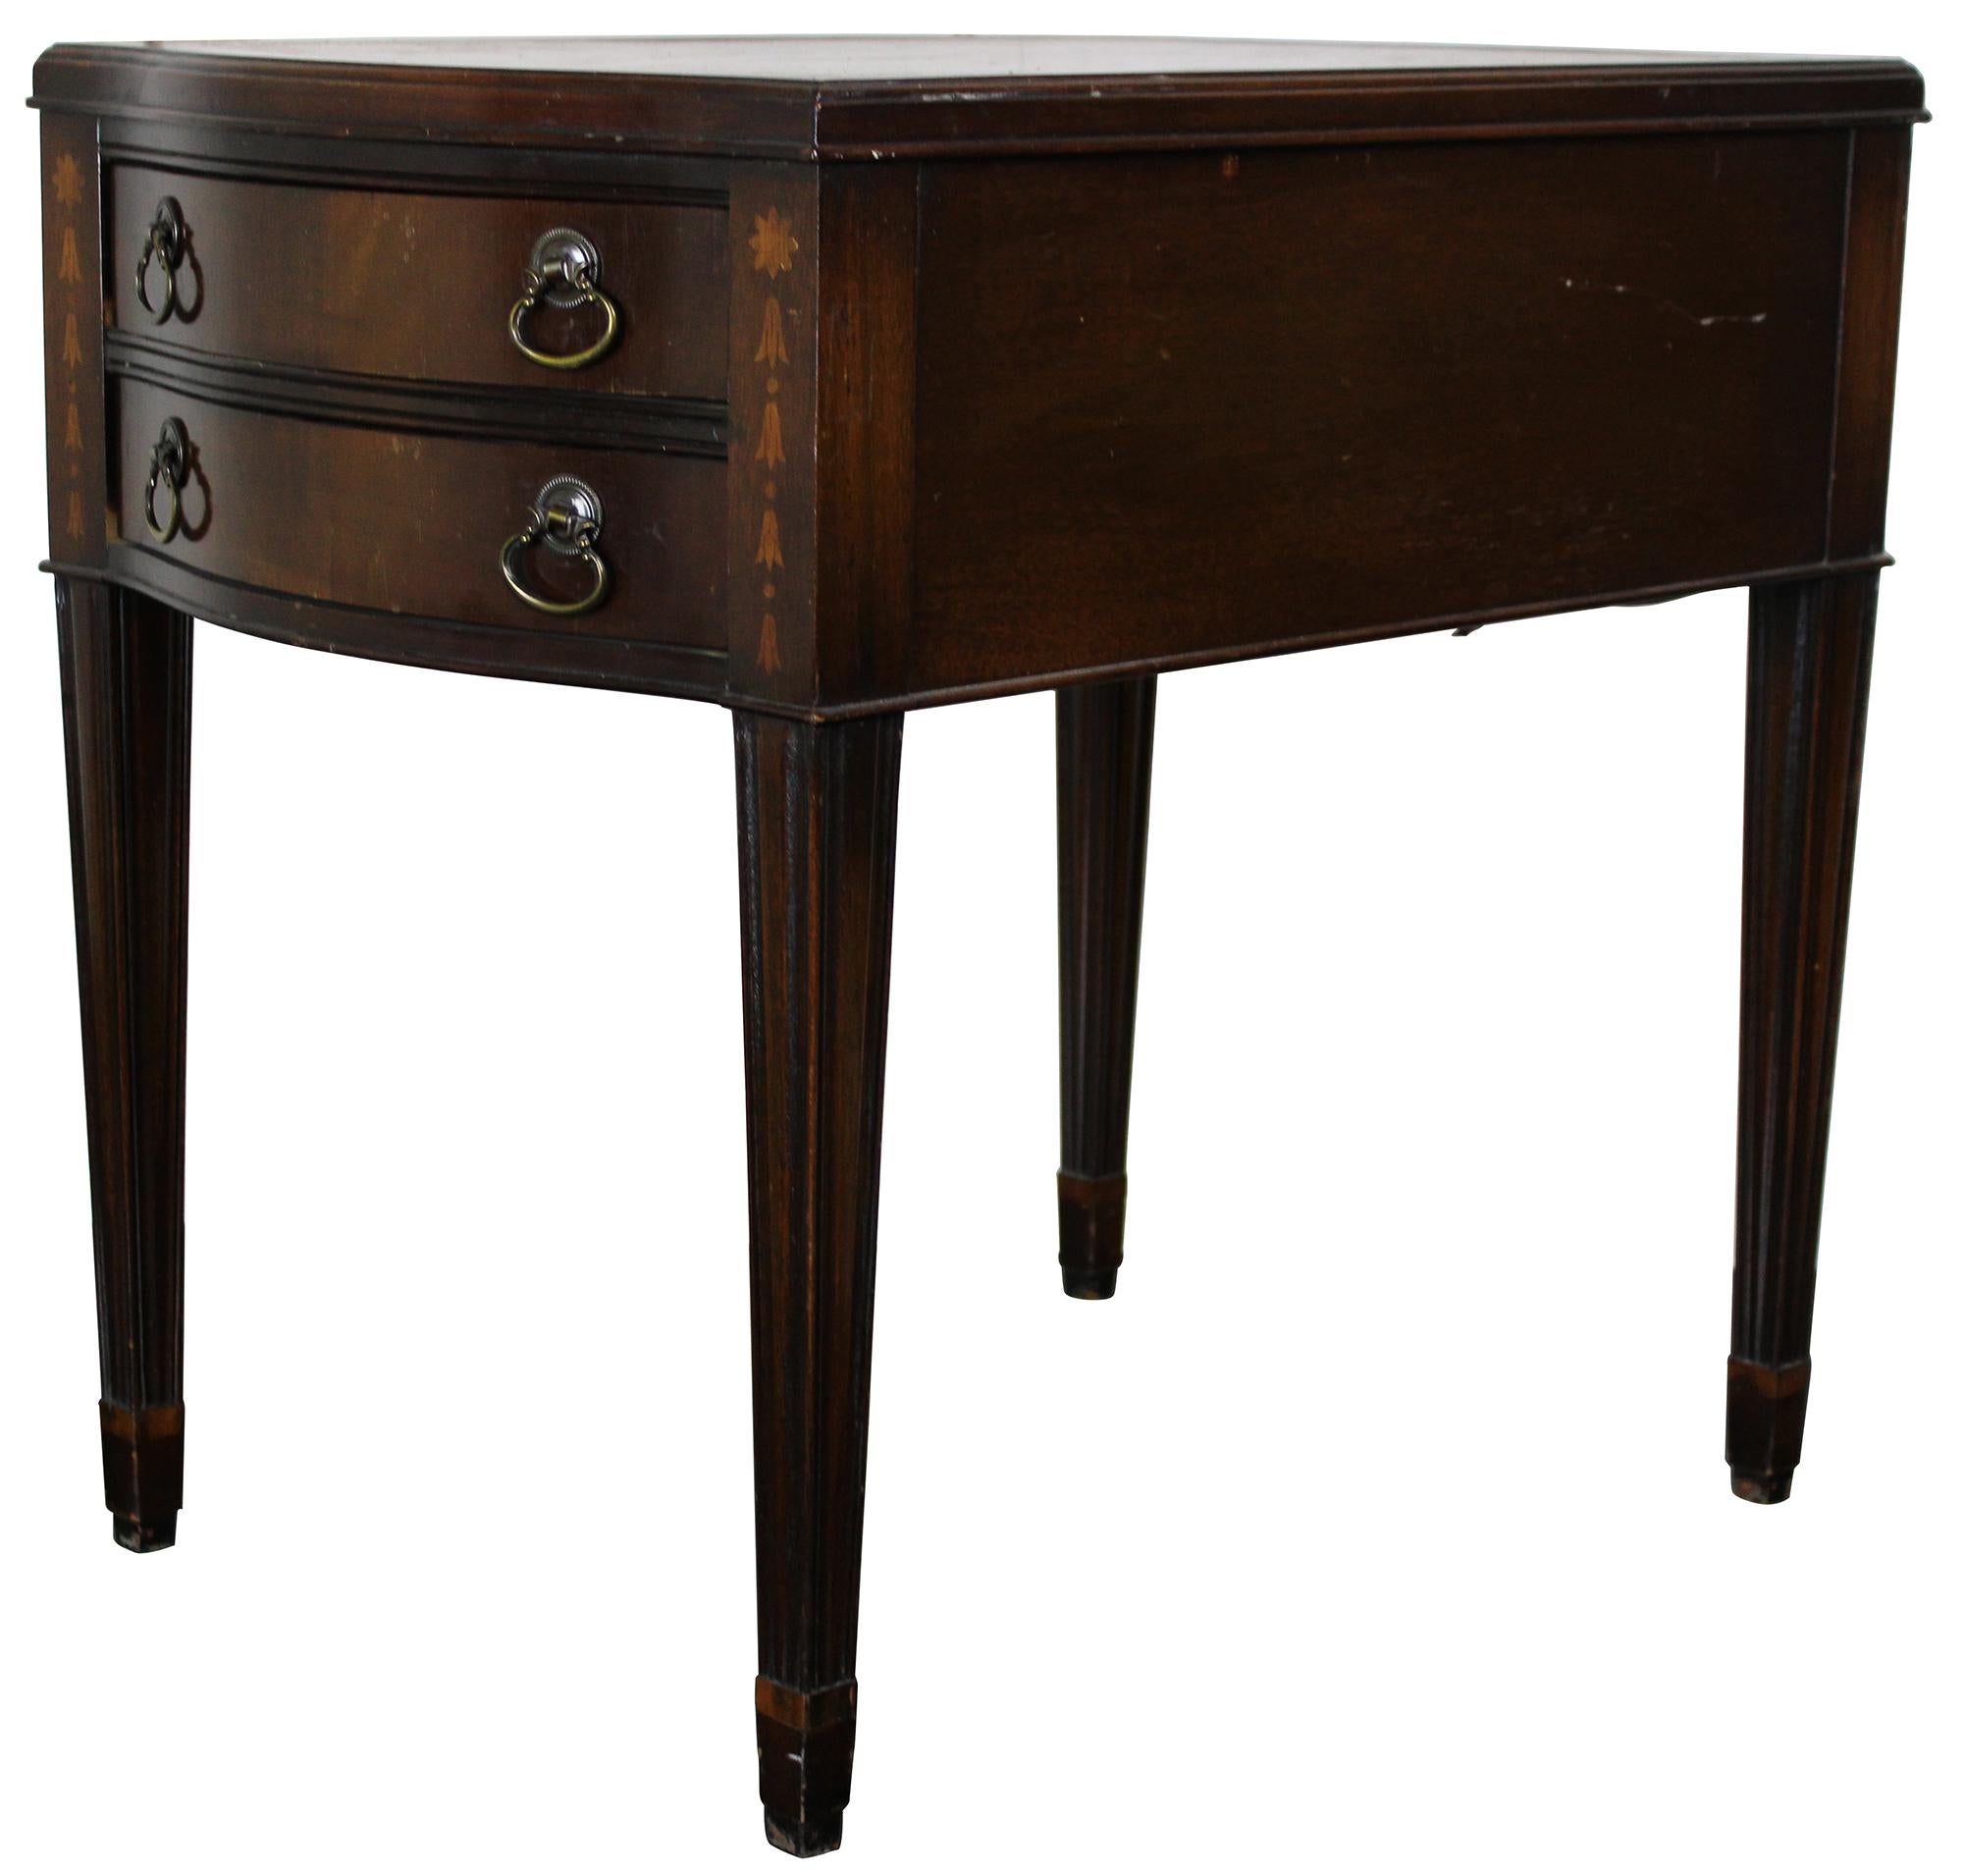 Midcentury Hepplewhite/ Sheraton end table. Made from mahogany with tooled leather top. Features a serpentine front of two dovetailed drawer and inlay. The table is supported by square tapered and fluted legs. Sold by F & R Lazarus & Co in Columbus